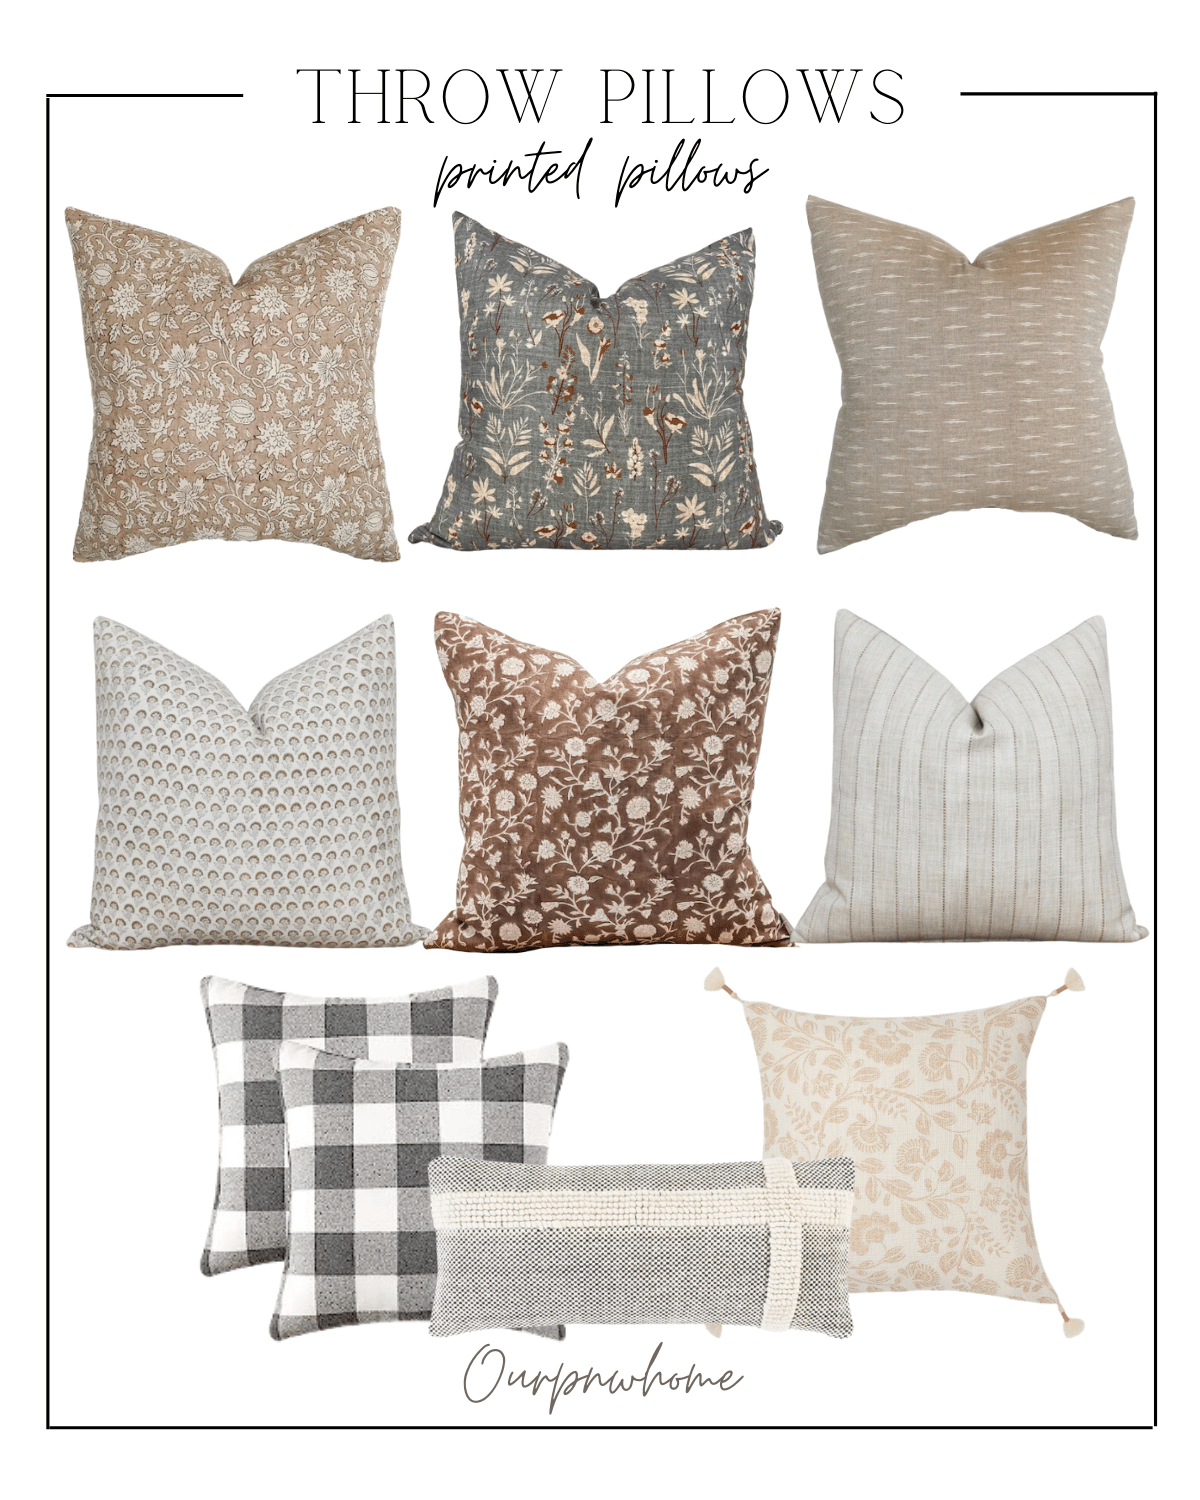 throw pillows, printed pillows, floral prints, pillow covers, accent pillows, neutral accent pillows, home decor, home styling 